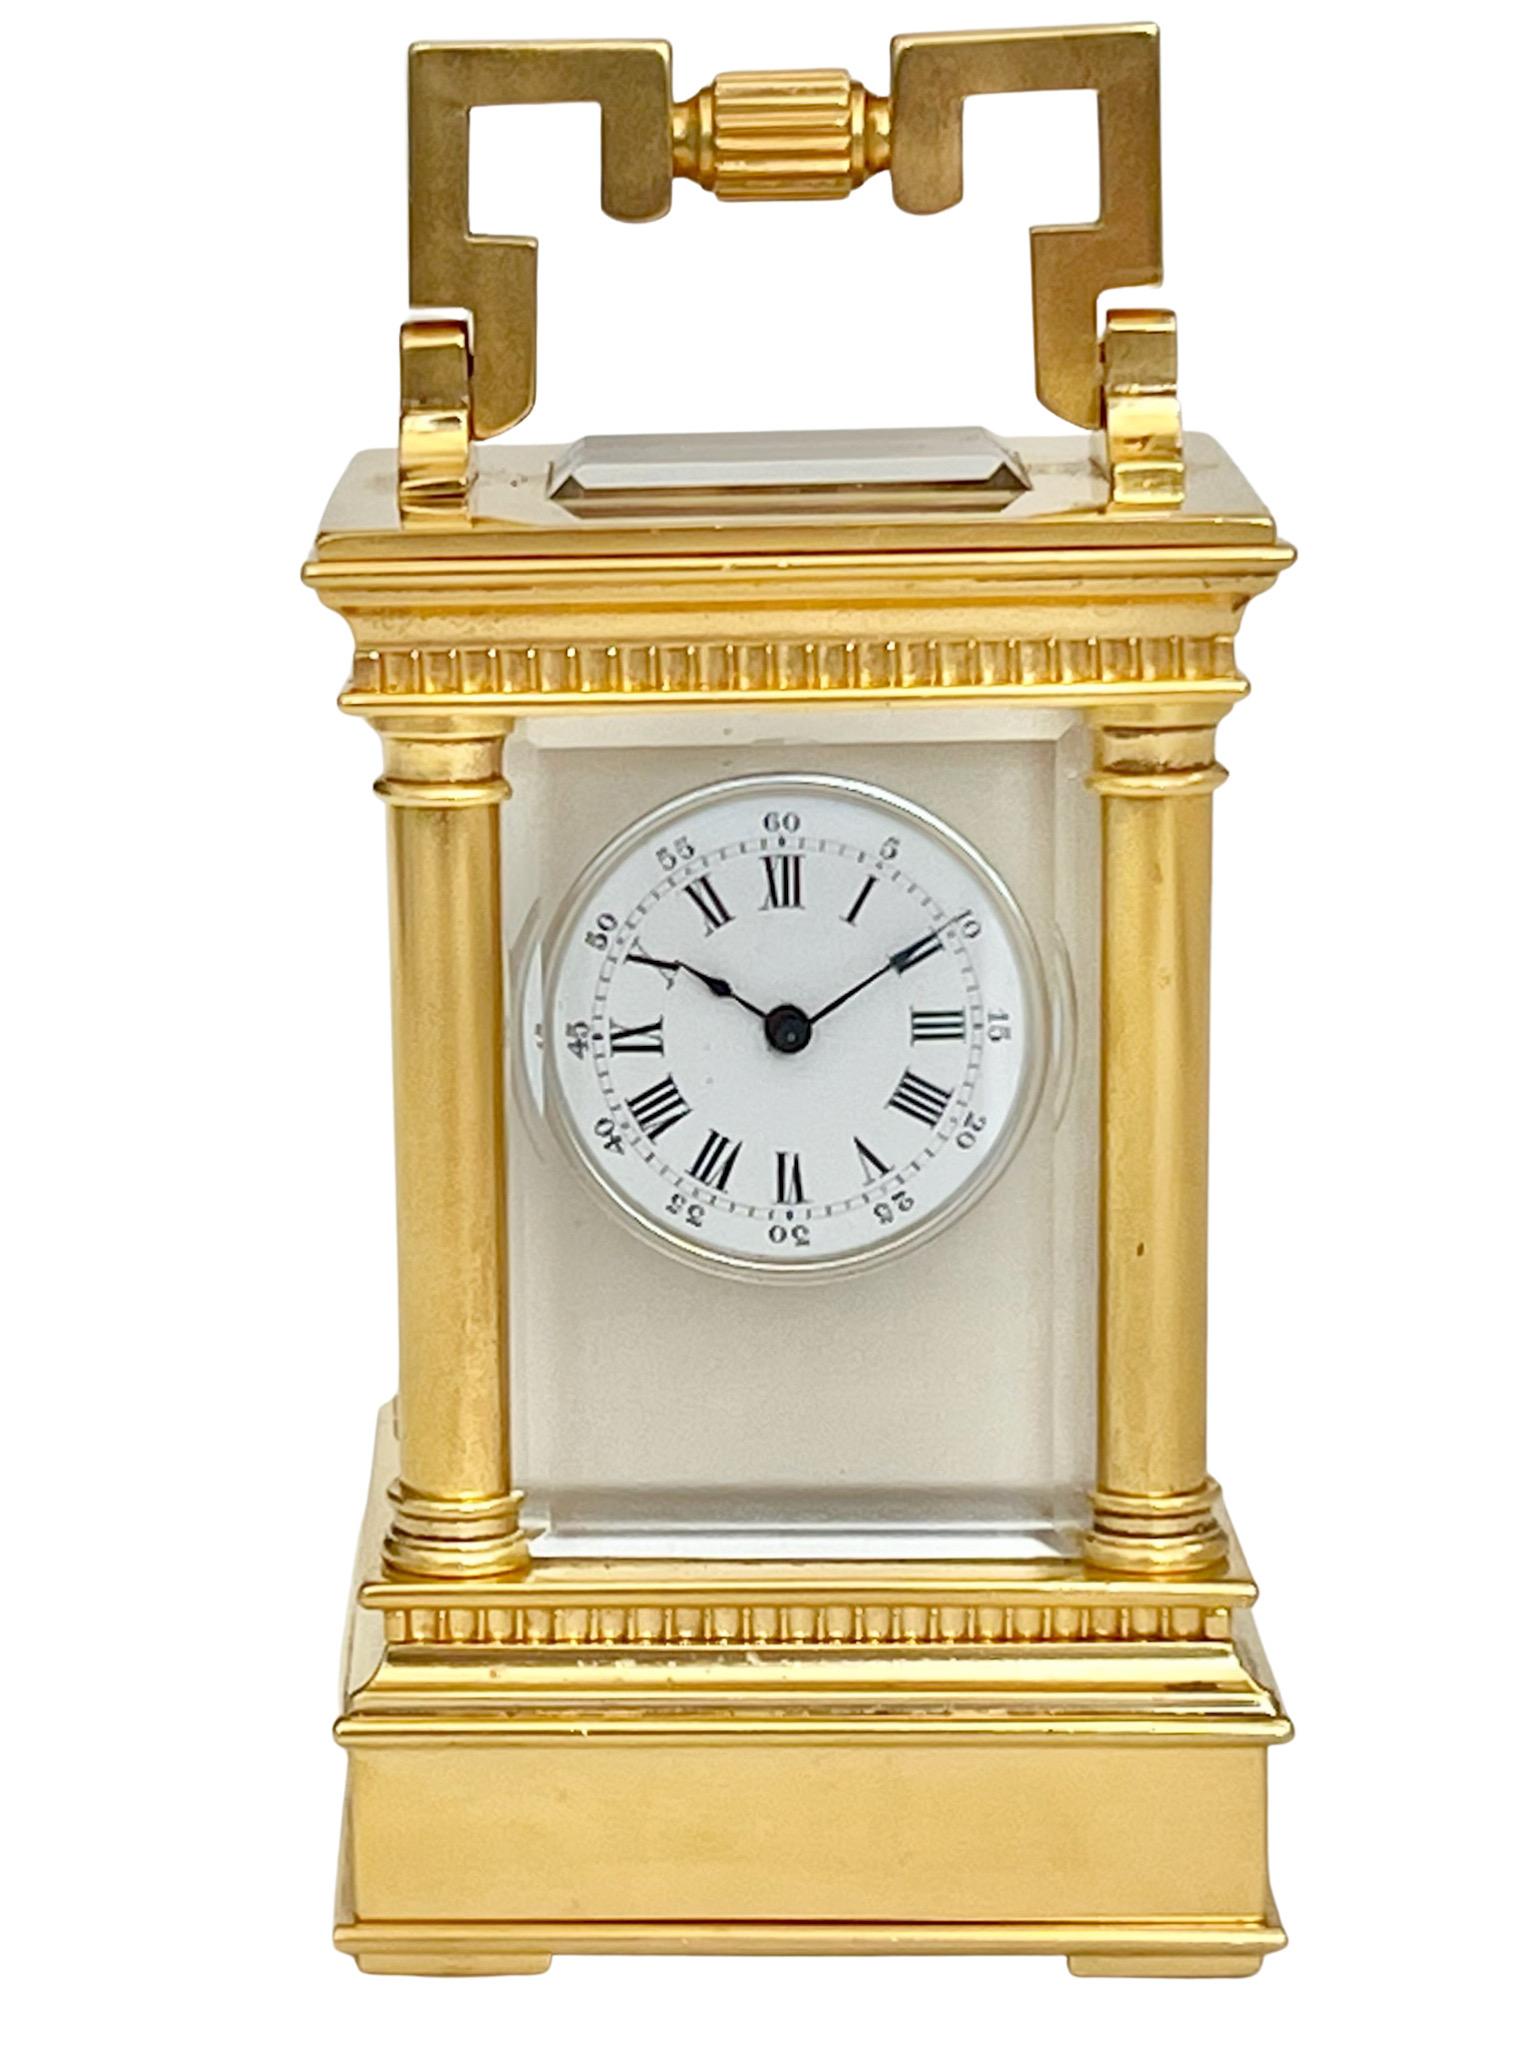 French Miniature timepiece carriage clock with original travel case. This is a very attractive miniature carriage clock in a beautifully executed Anglais Riche case with rounded columns, ripple mouldings, square glazed viewing aperture and hinged